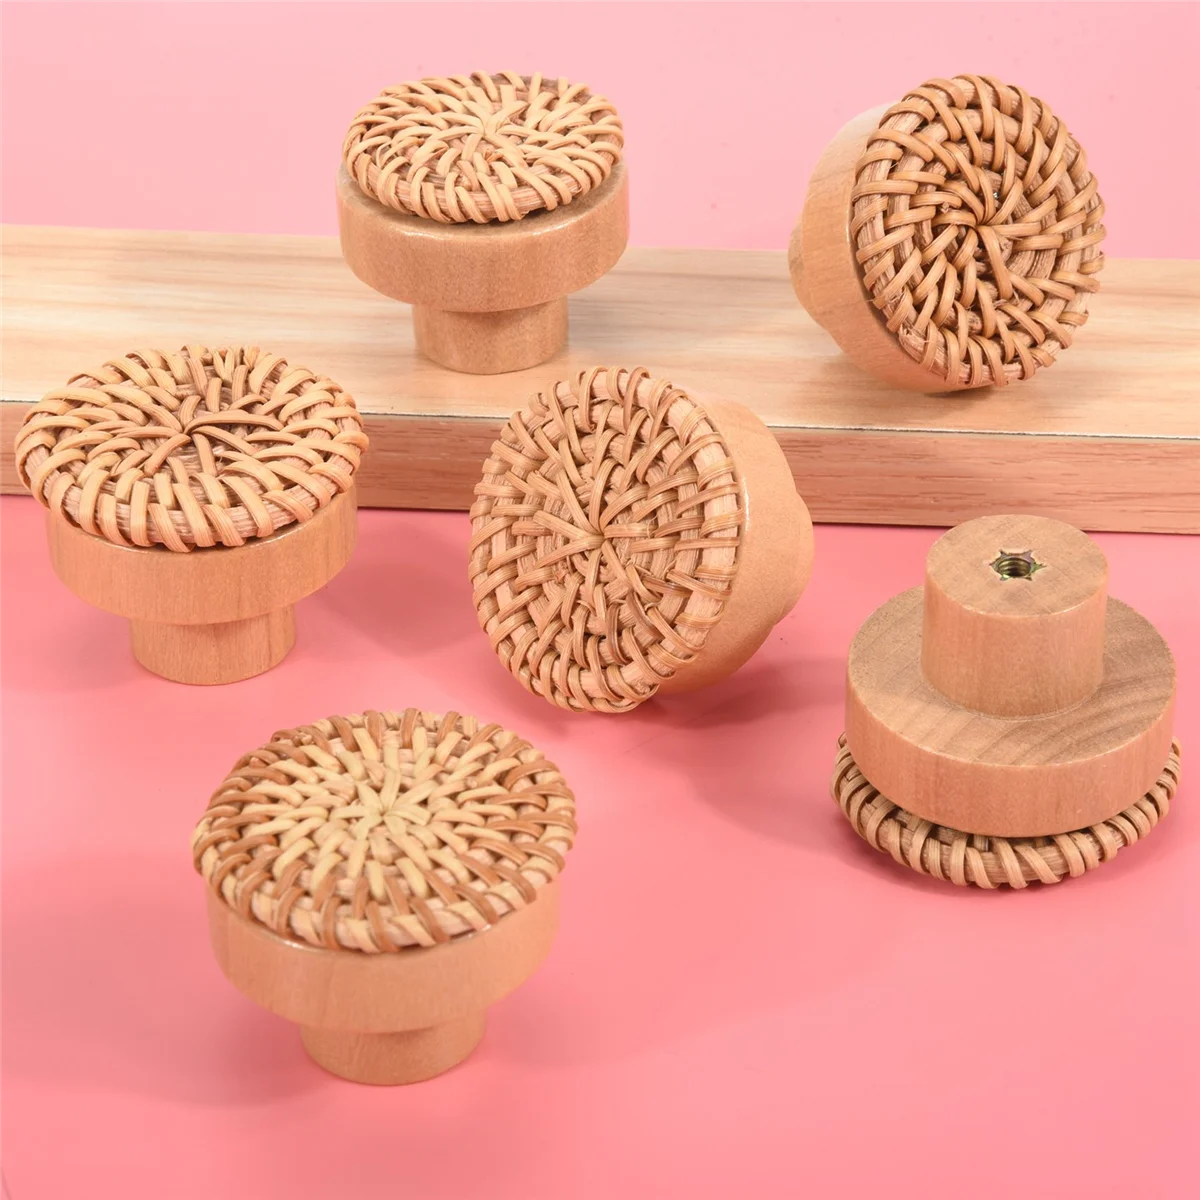 

Boho Rattan Dresser Knobs Round Wooden Drawer Knobs Handmade Wicker Woven and Screws for Boho Furniture Knobs 12Pcs